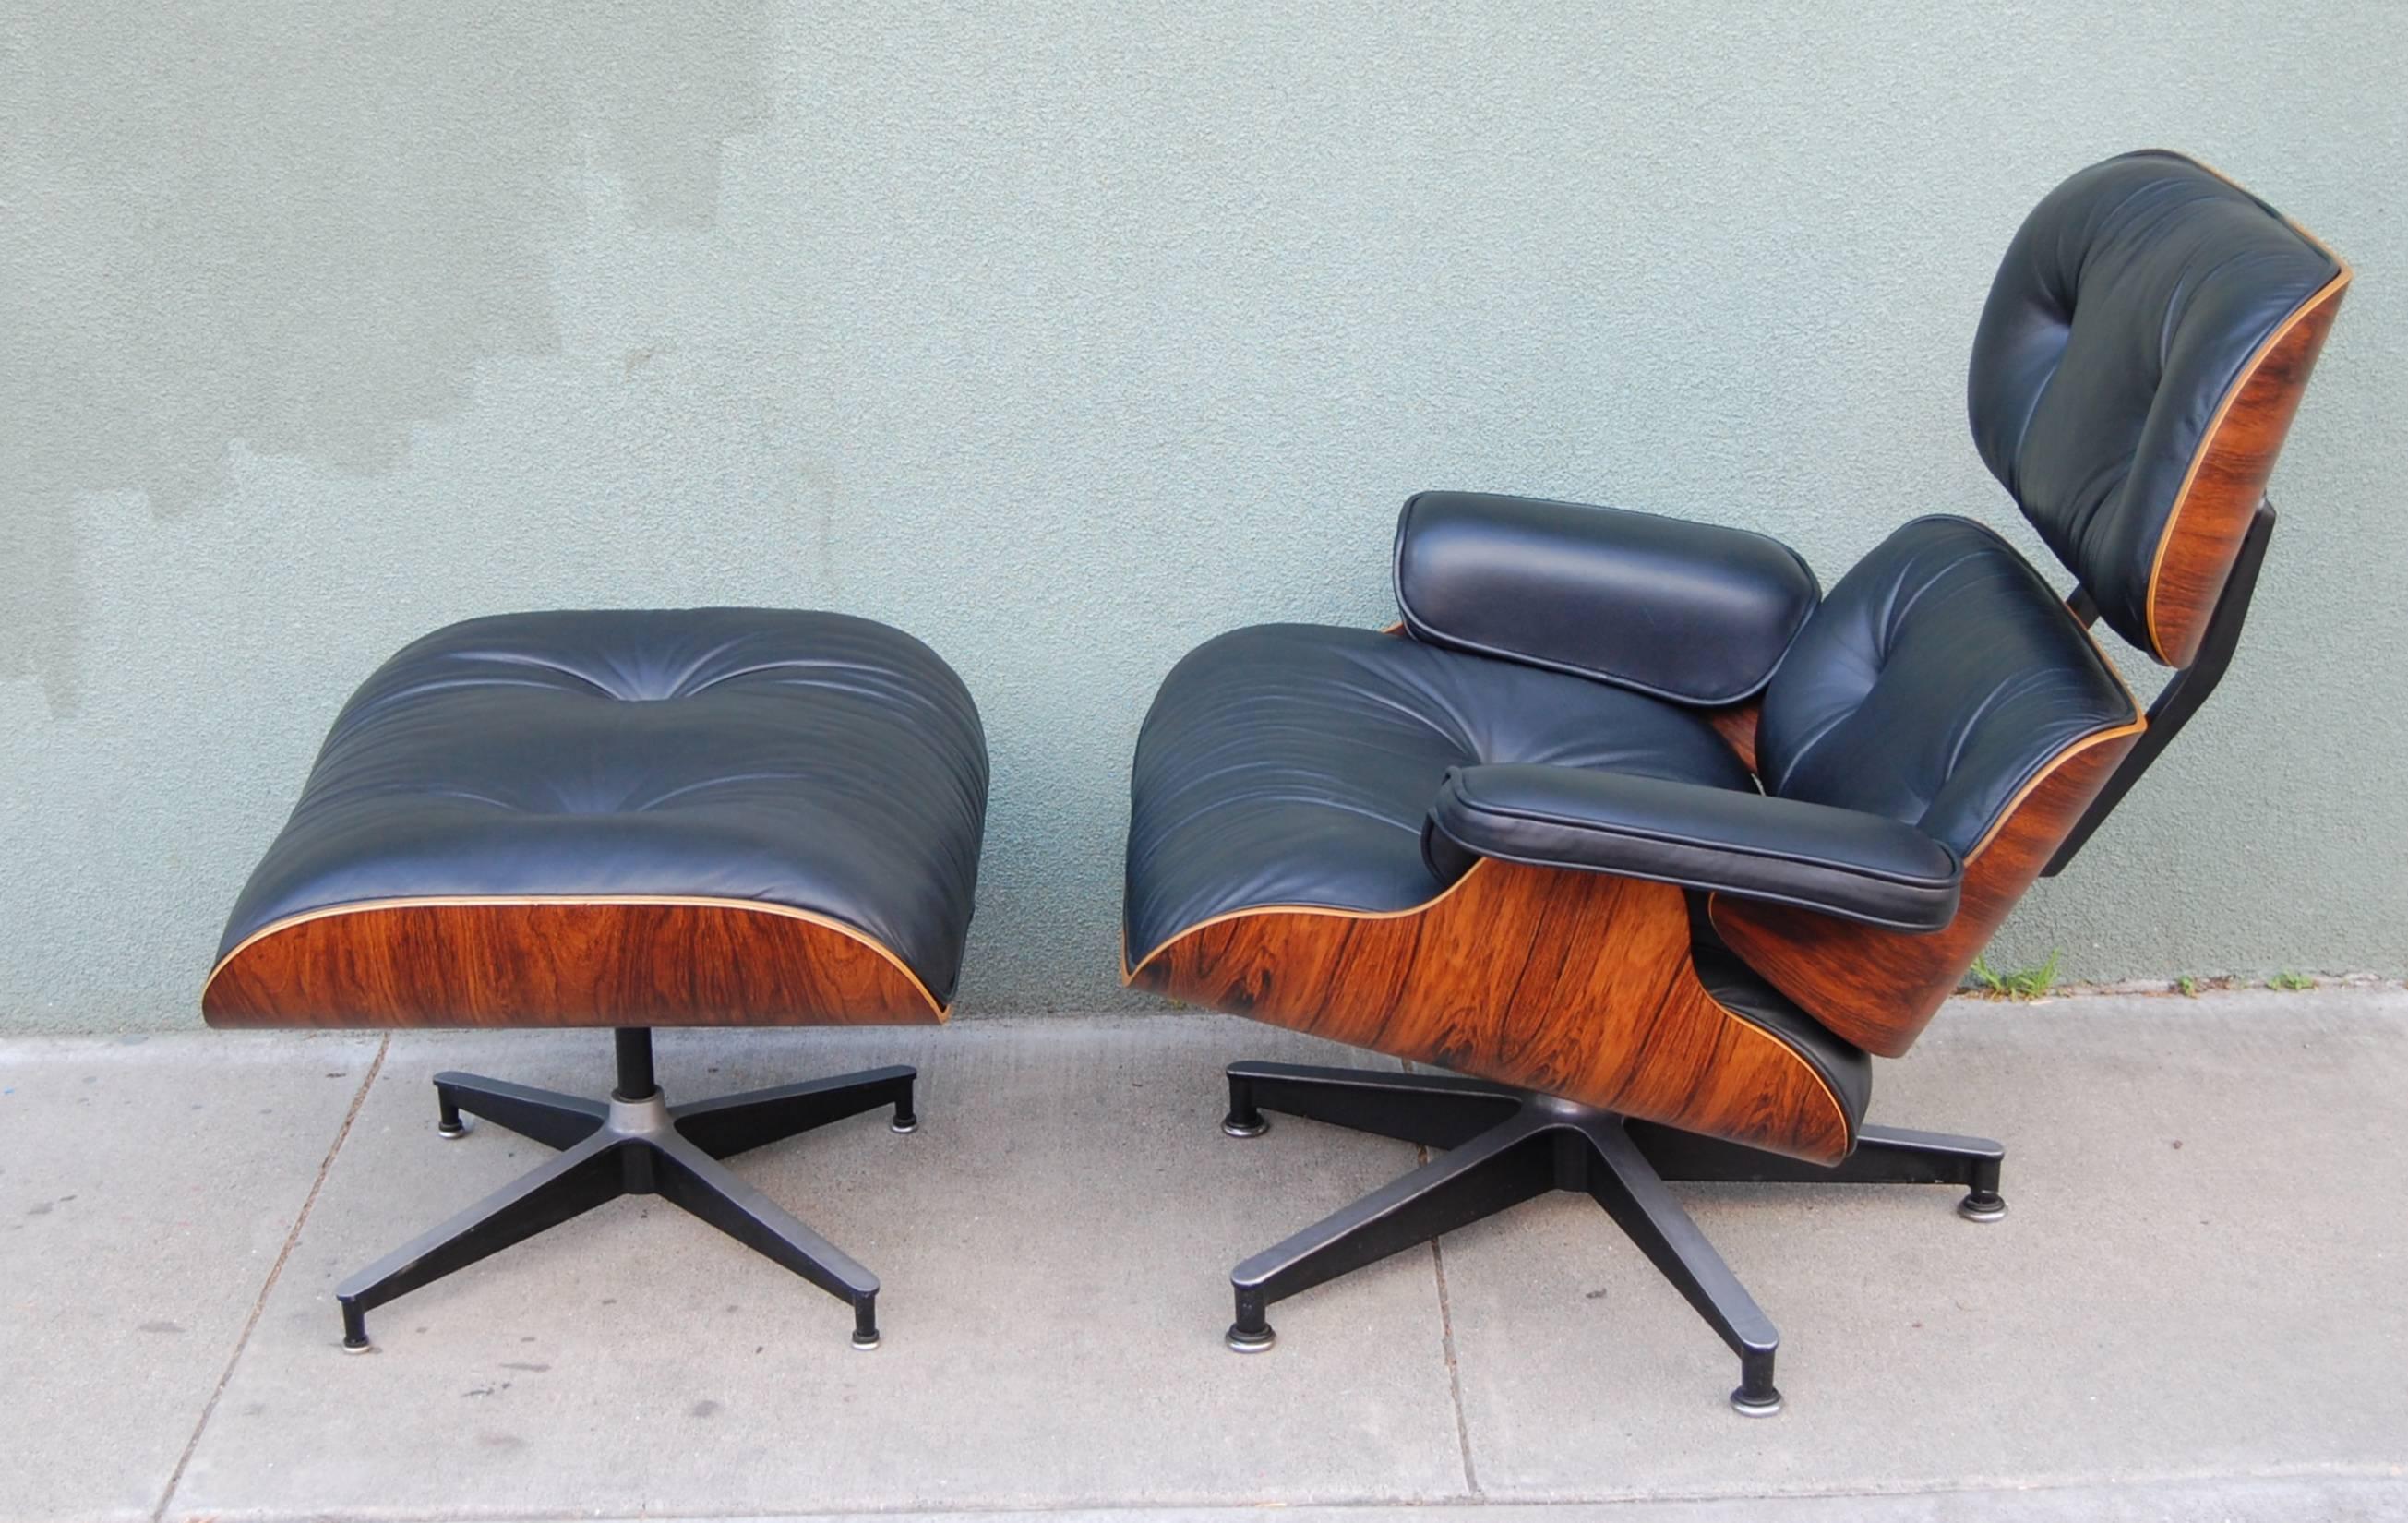 Late 1970s Eames lounge and ottoman, crafted out of Brazilian rosewood with plush black leather upholstery. Striking grain to the wood and extremely comfortable to lounge in, a stand out example. This has undergone a light restoration to the finish